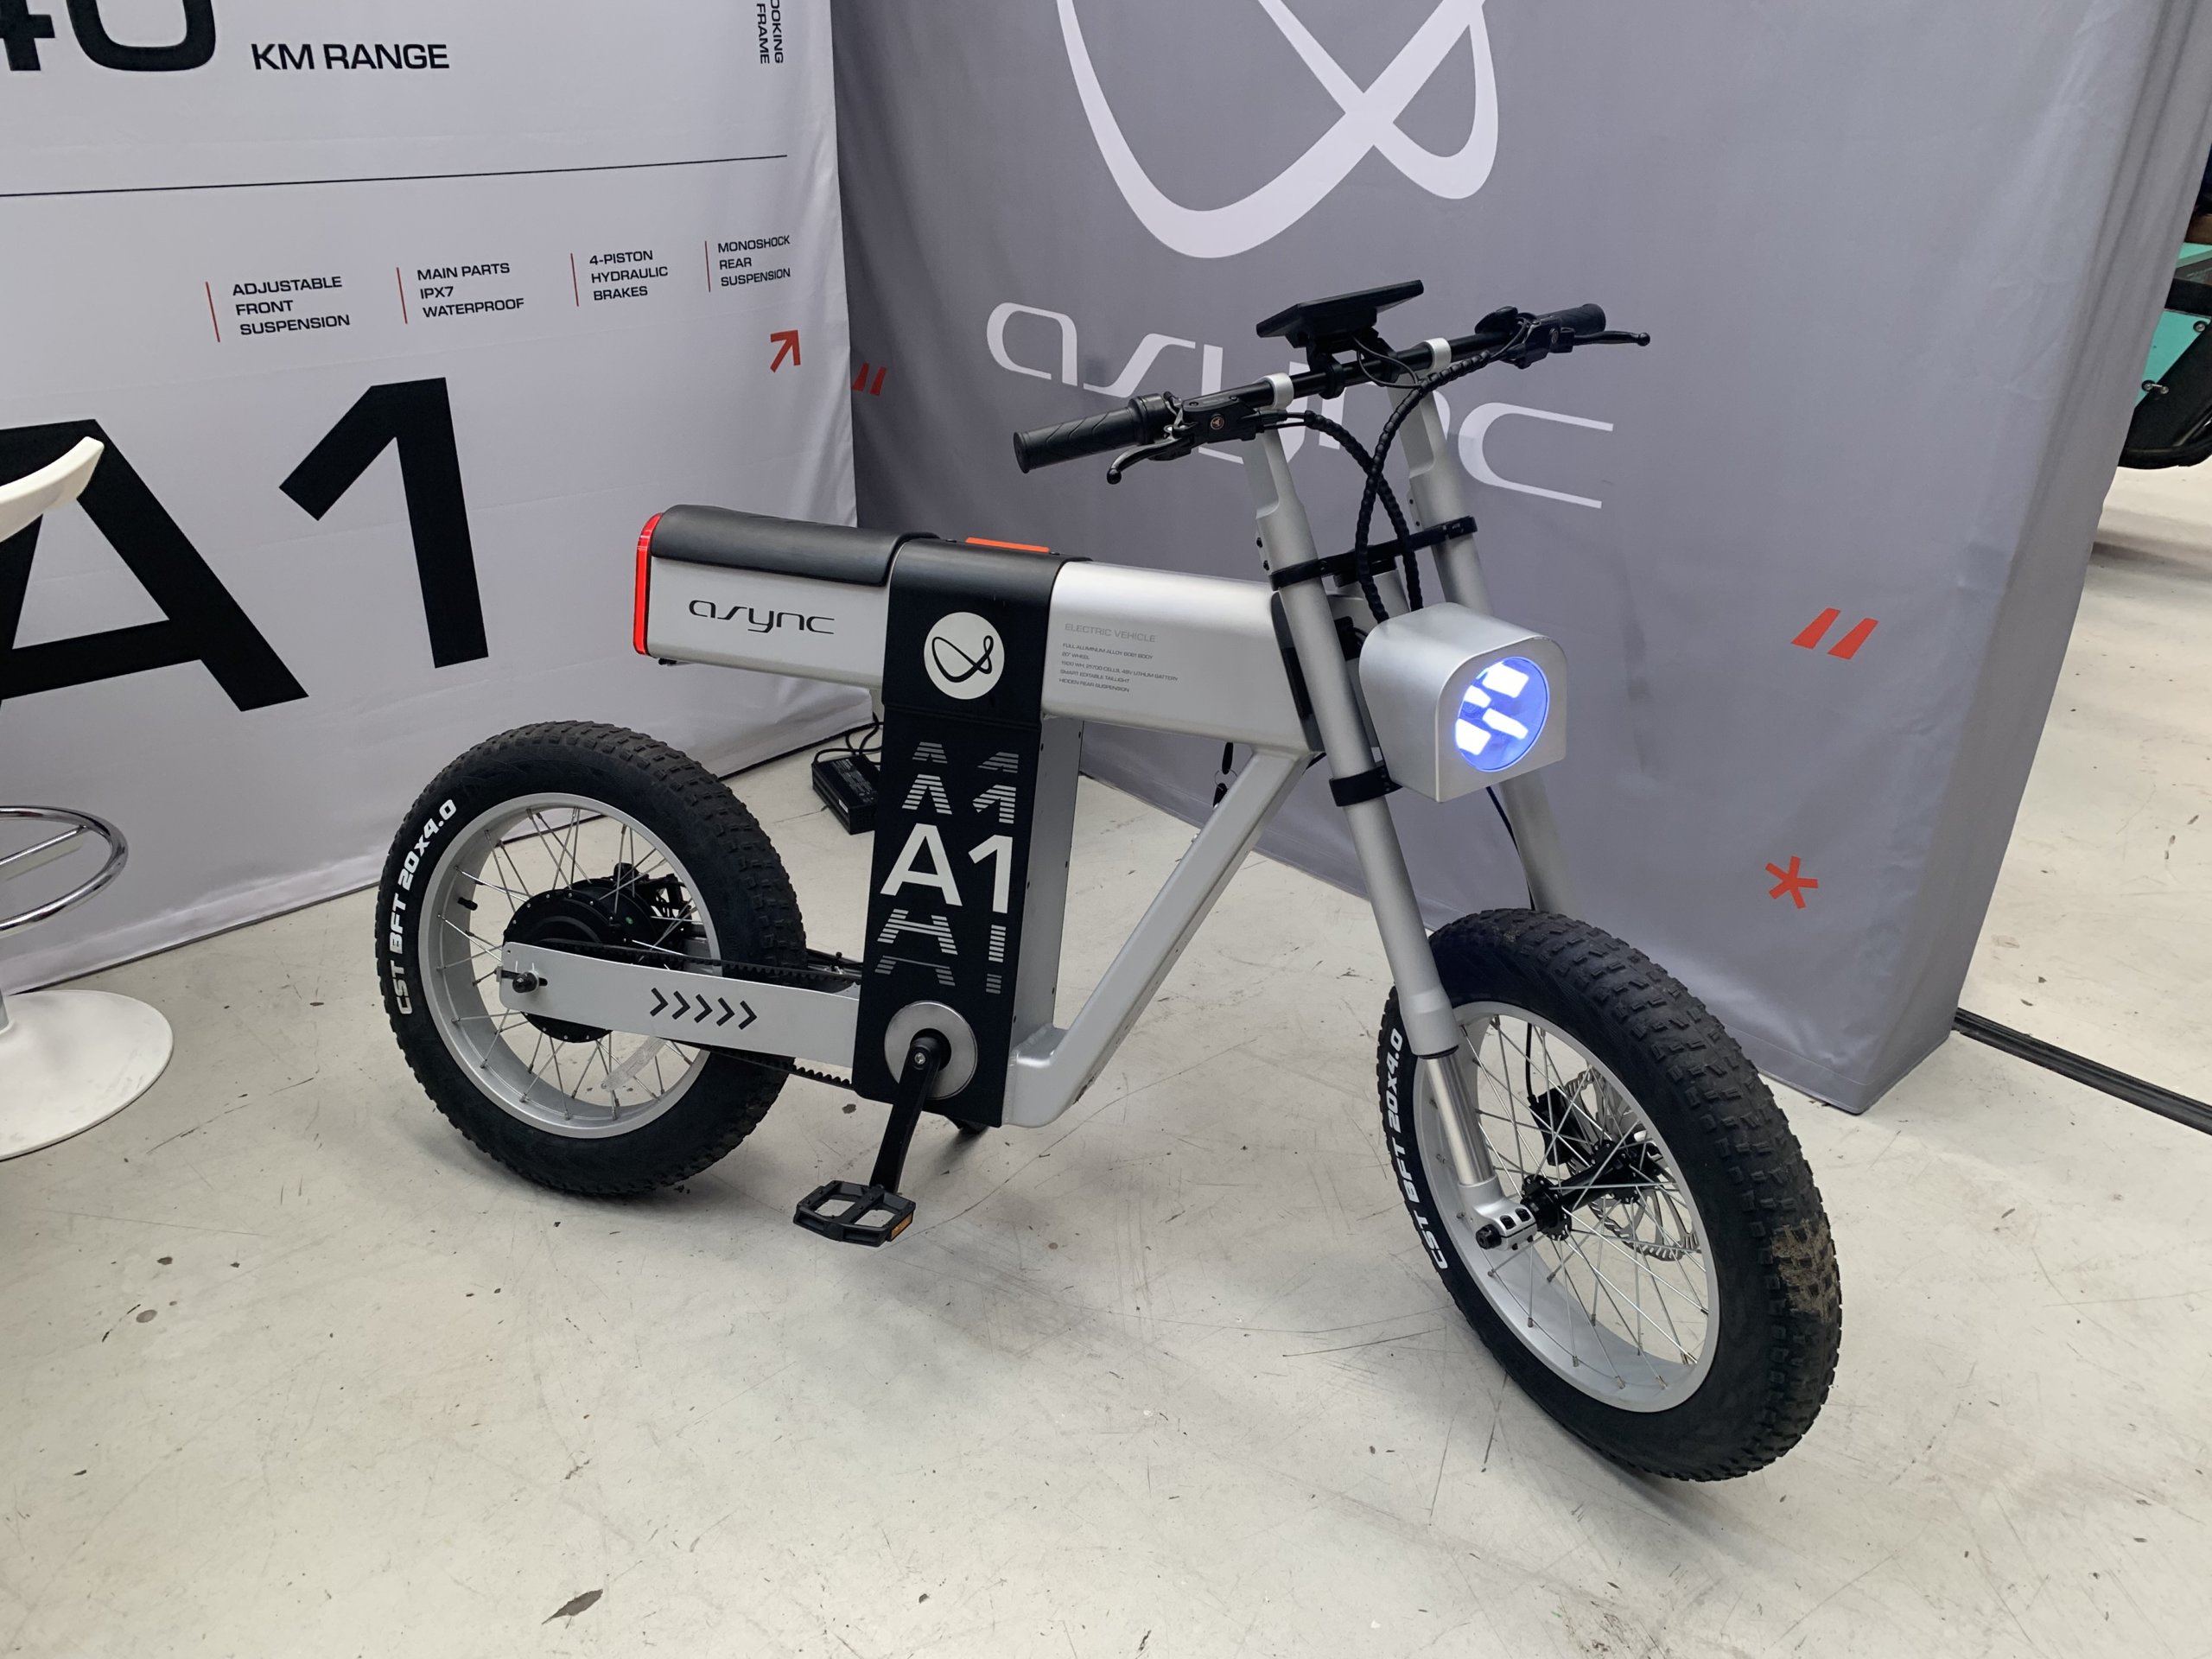 Exhibition display of a sleek, modern A1 electric bike by Qync, featuring chunky off-road tires, a prominent frame-mounted battery, and a front LED light, set against a backdrop with specifications listed such as 'KM Range' and 'Adjustable Front Suspension'.